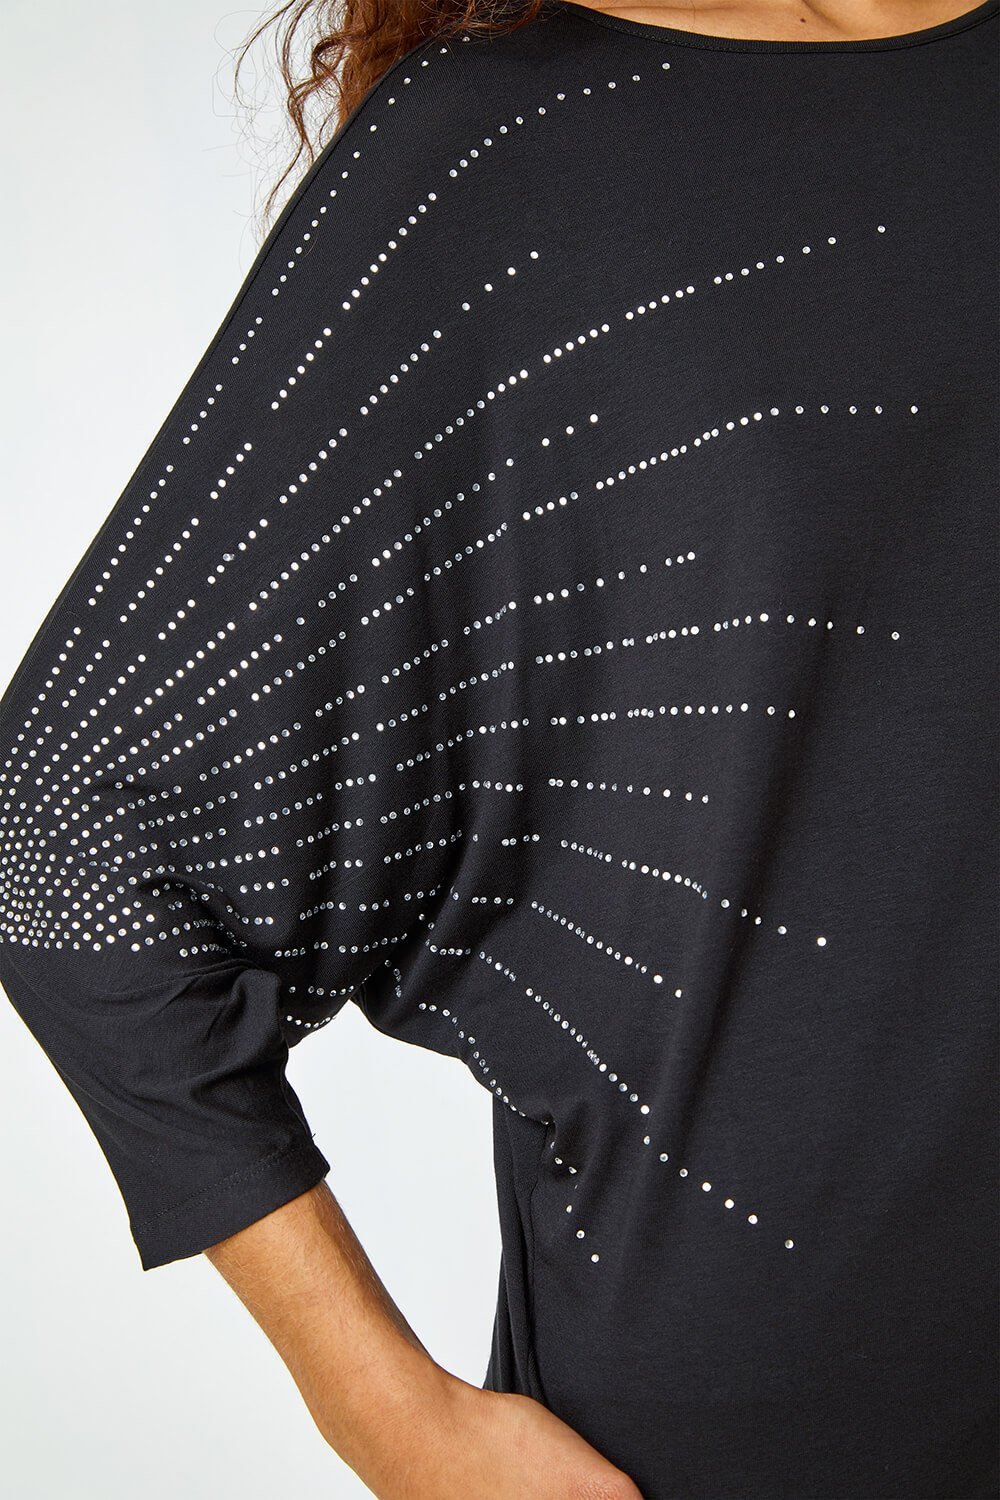 Black Embellished Relaxed Stretch Top, Image 5 of 5